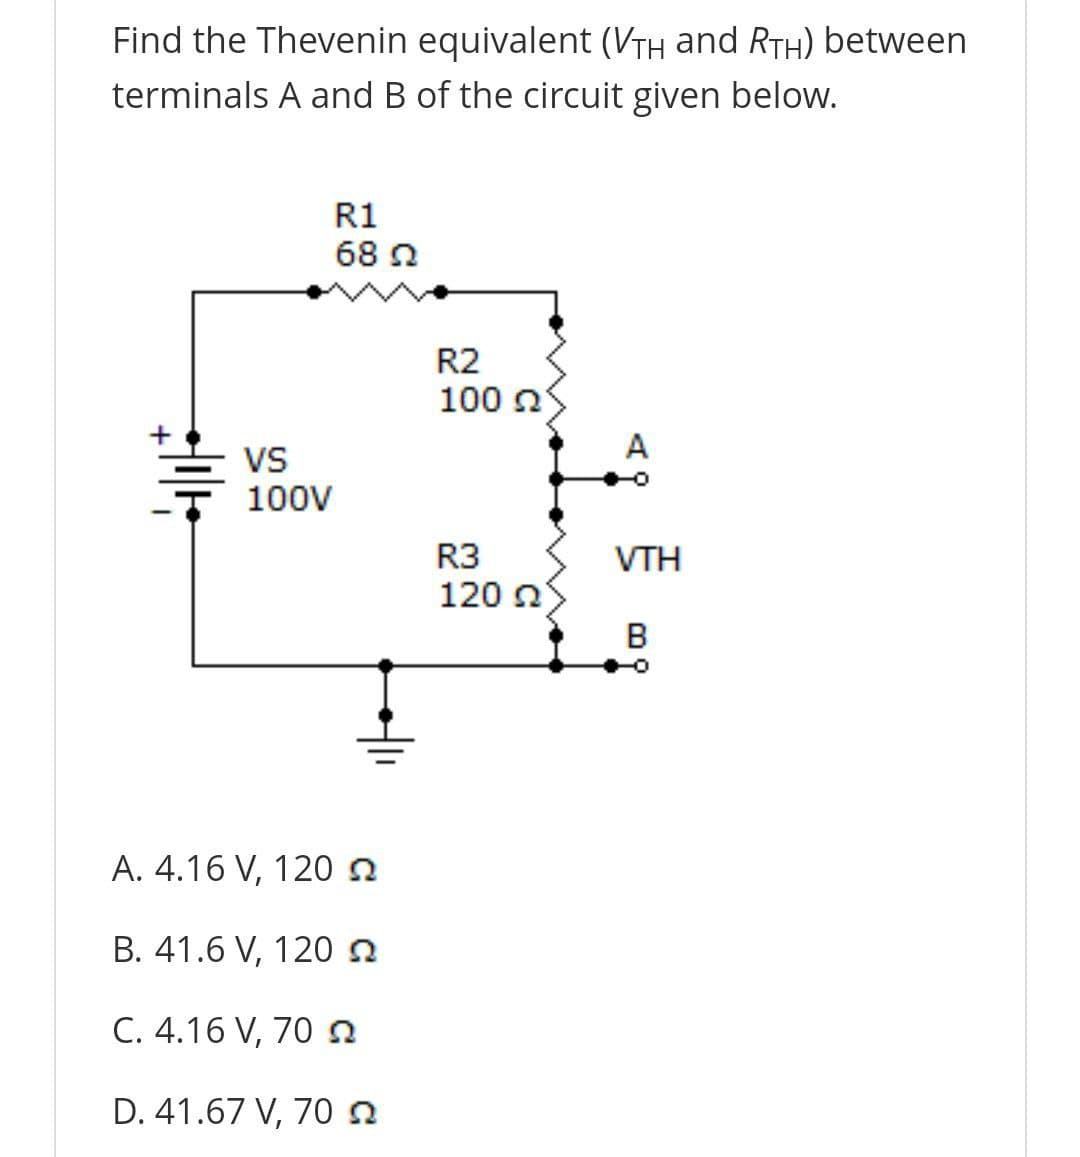 Find the Thevenin equivalent (VTh and RTH) between
terminals A and B of the circuit given below.
R1
68 2
R2
100 n
A
VS
100V
R3
VTH
120 n
B
A. 4.16 V, 120n
B. 41.6 V, 120n
C. 4.16 V, 70 a
D. 41.67 V, 70 n
